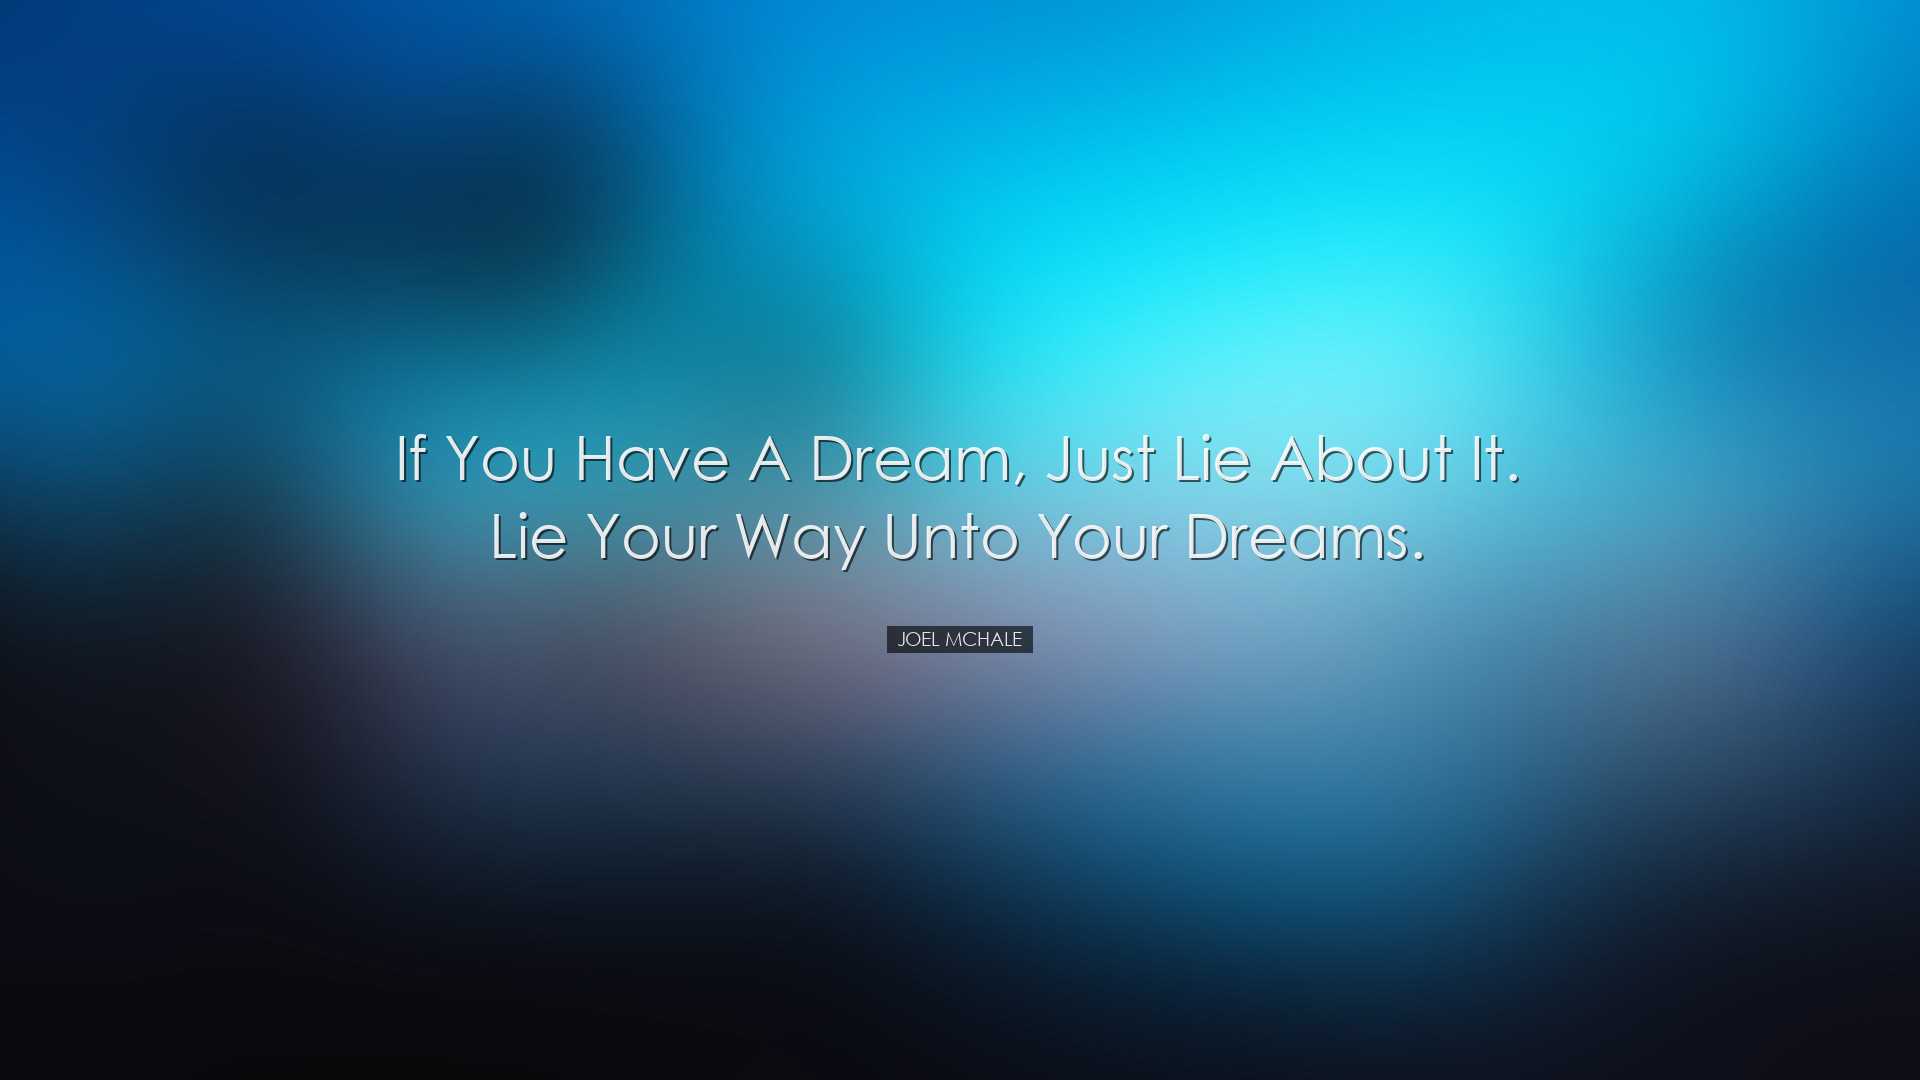 If you have a dream, just lie about it. Lie your way unto your dre